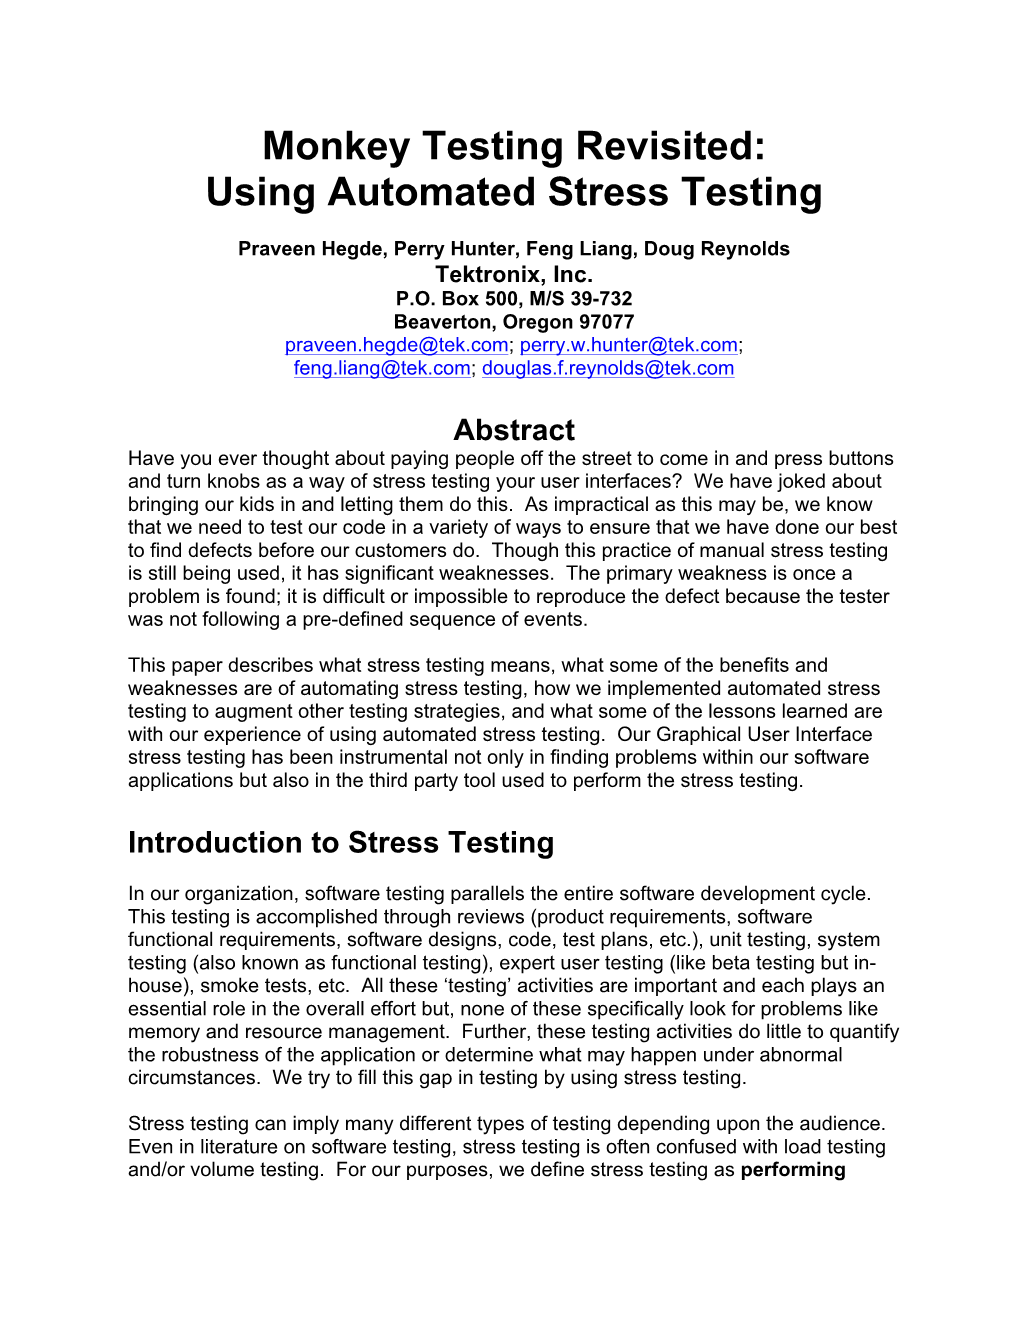 Monkey Testing Revisited: Using Automated Stress Testing